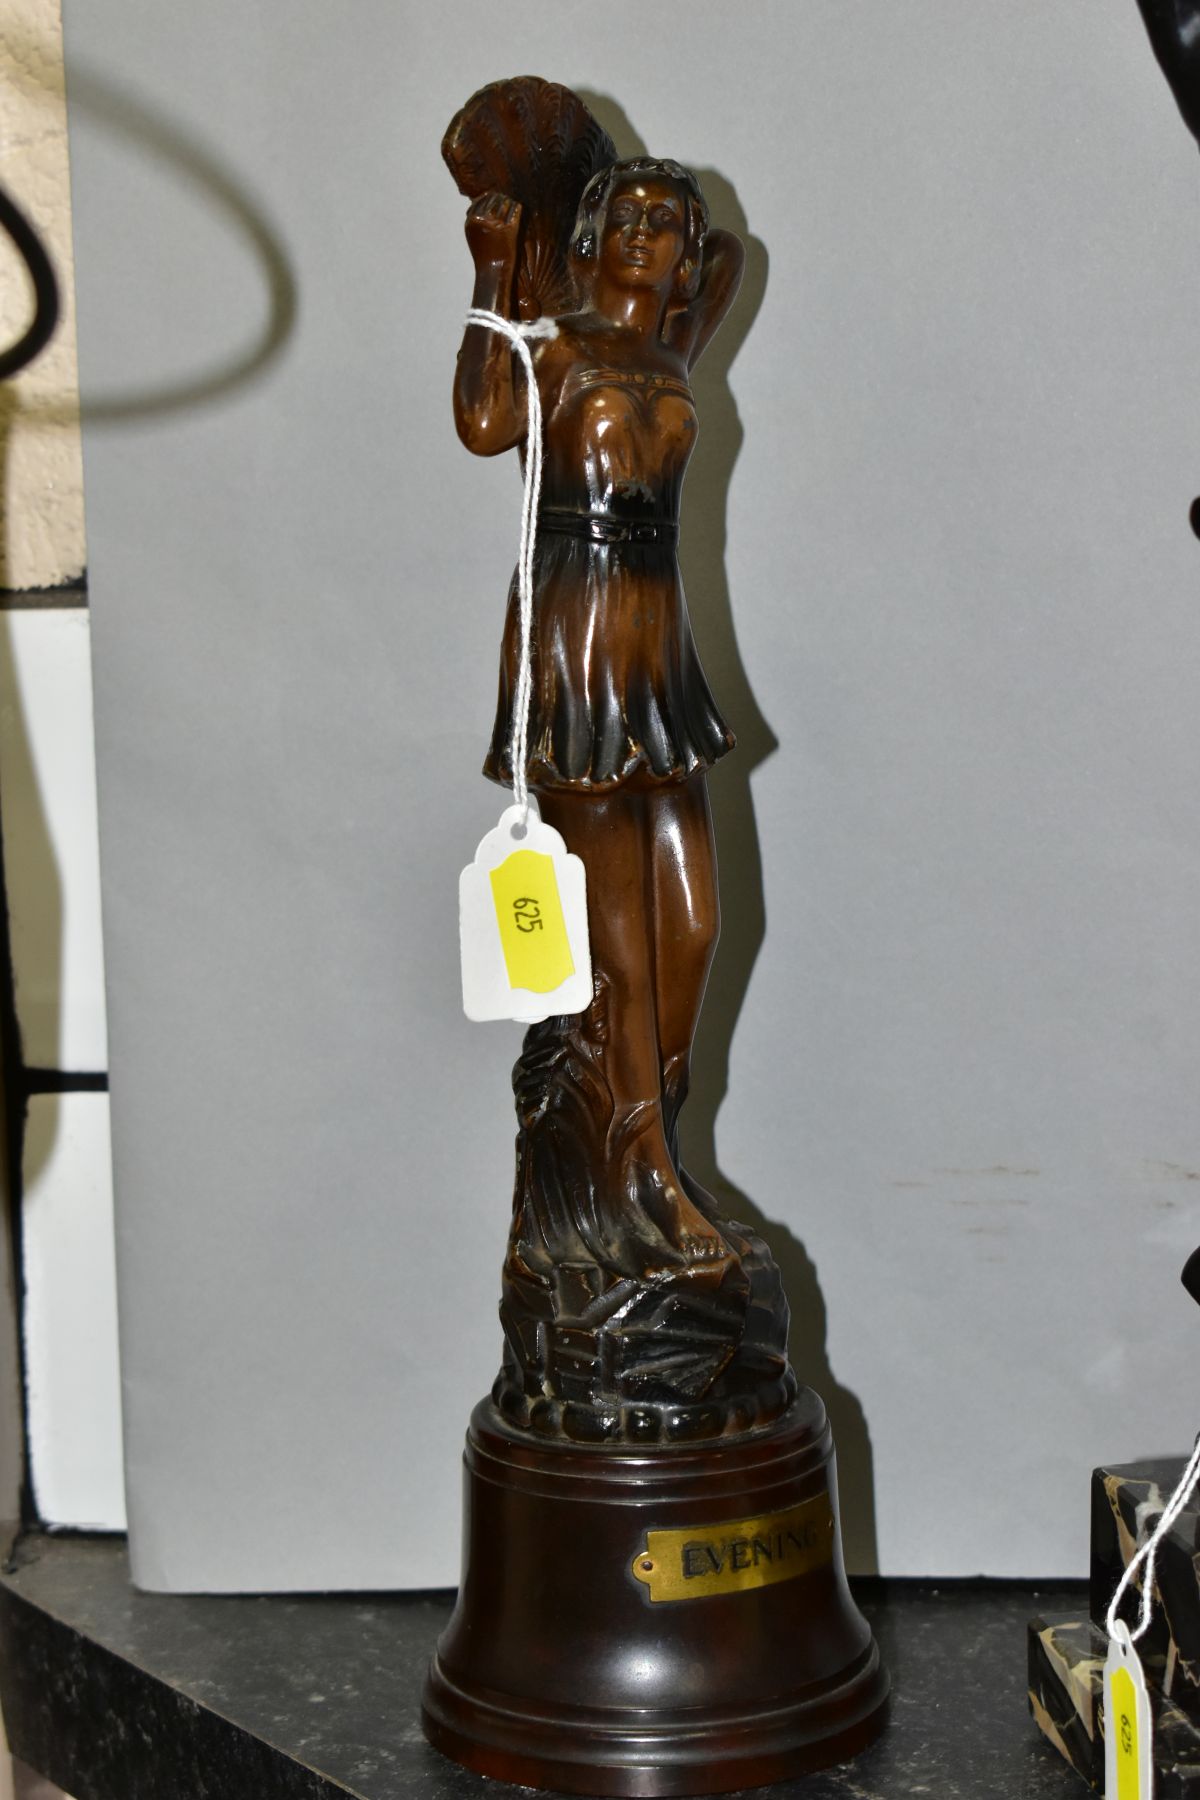 ART DECO STYLE FIGURINES, comprising a bronzed metal scantilly clad female on an onyx plinth, - Image 5 of 11